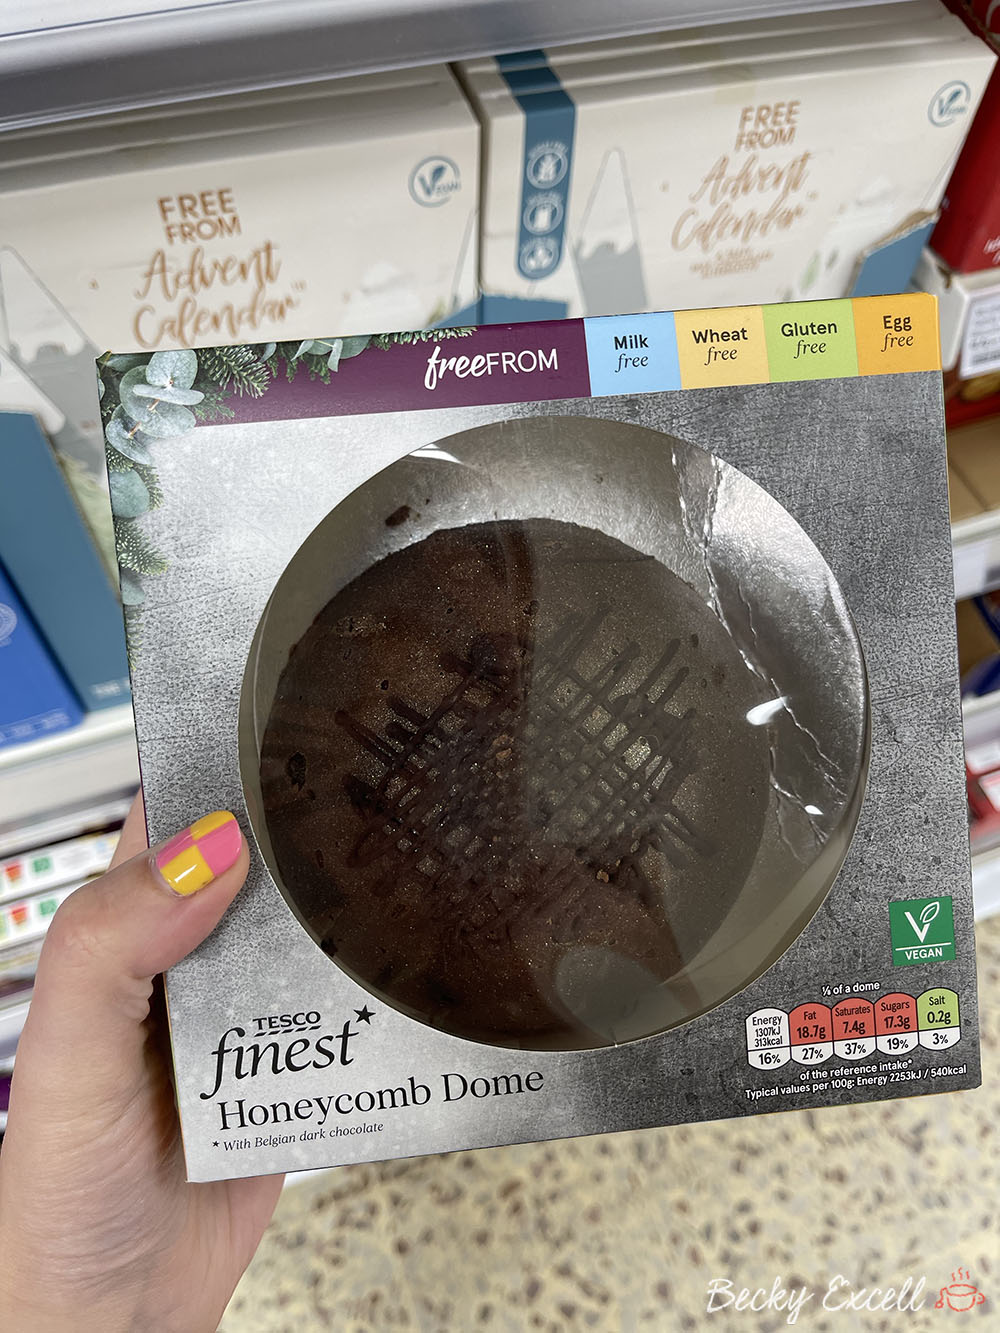 Tescos gluten-free Christmas products 2021: Honeycomb Dome